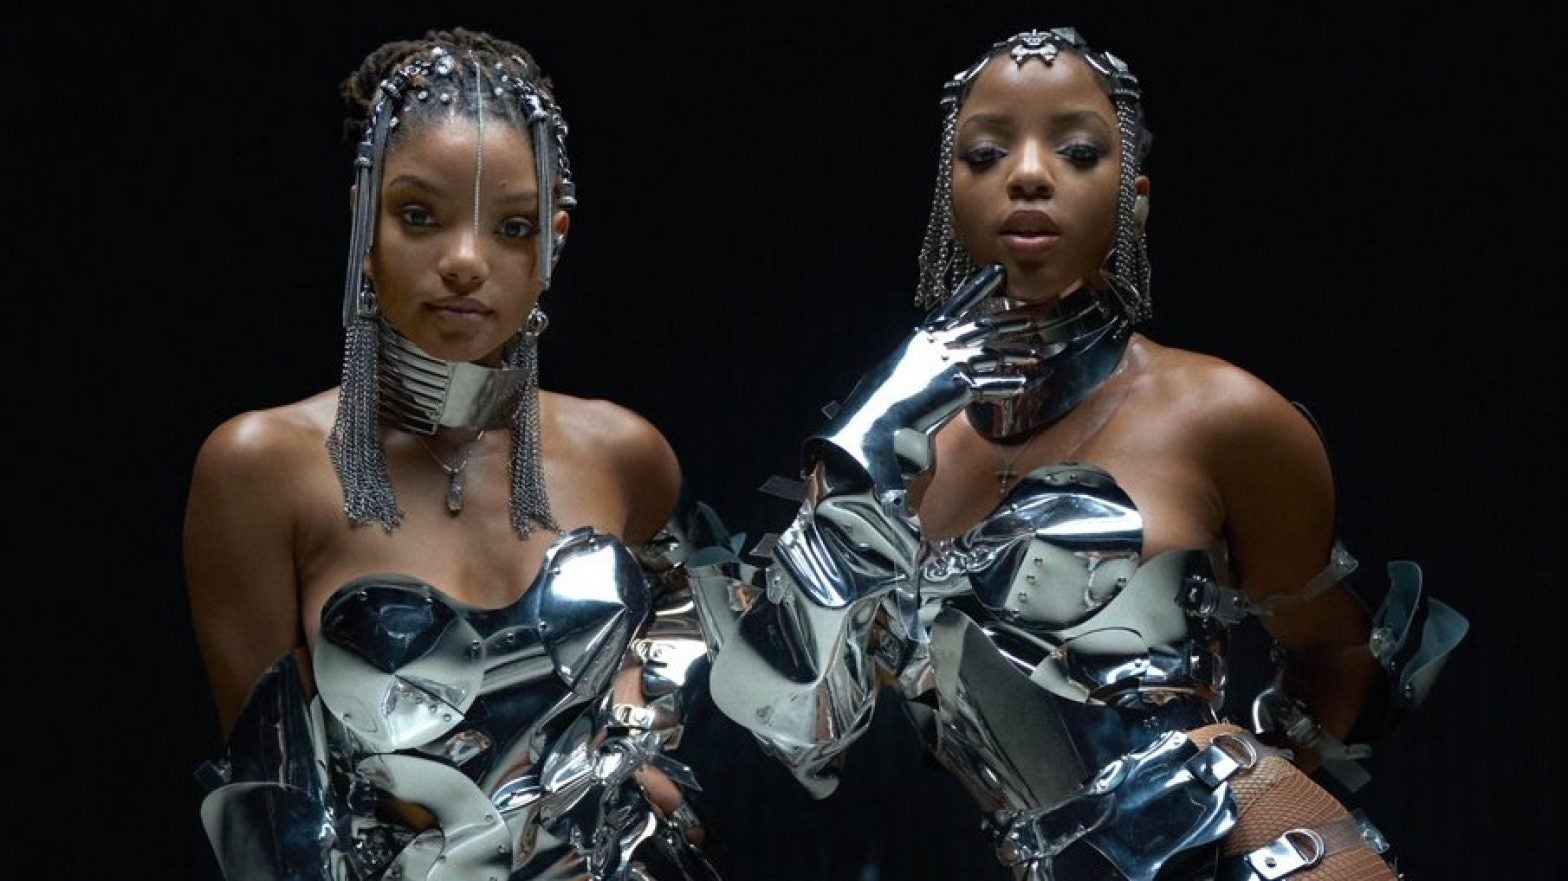 Fans React To Chloe x Halle's 'Ungodly' Grammy Snub